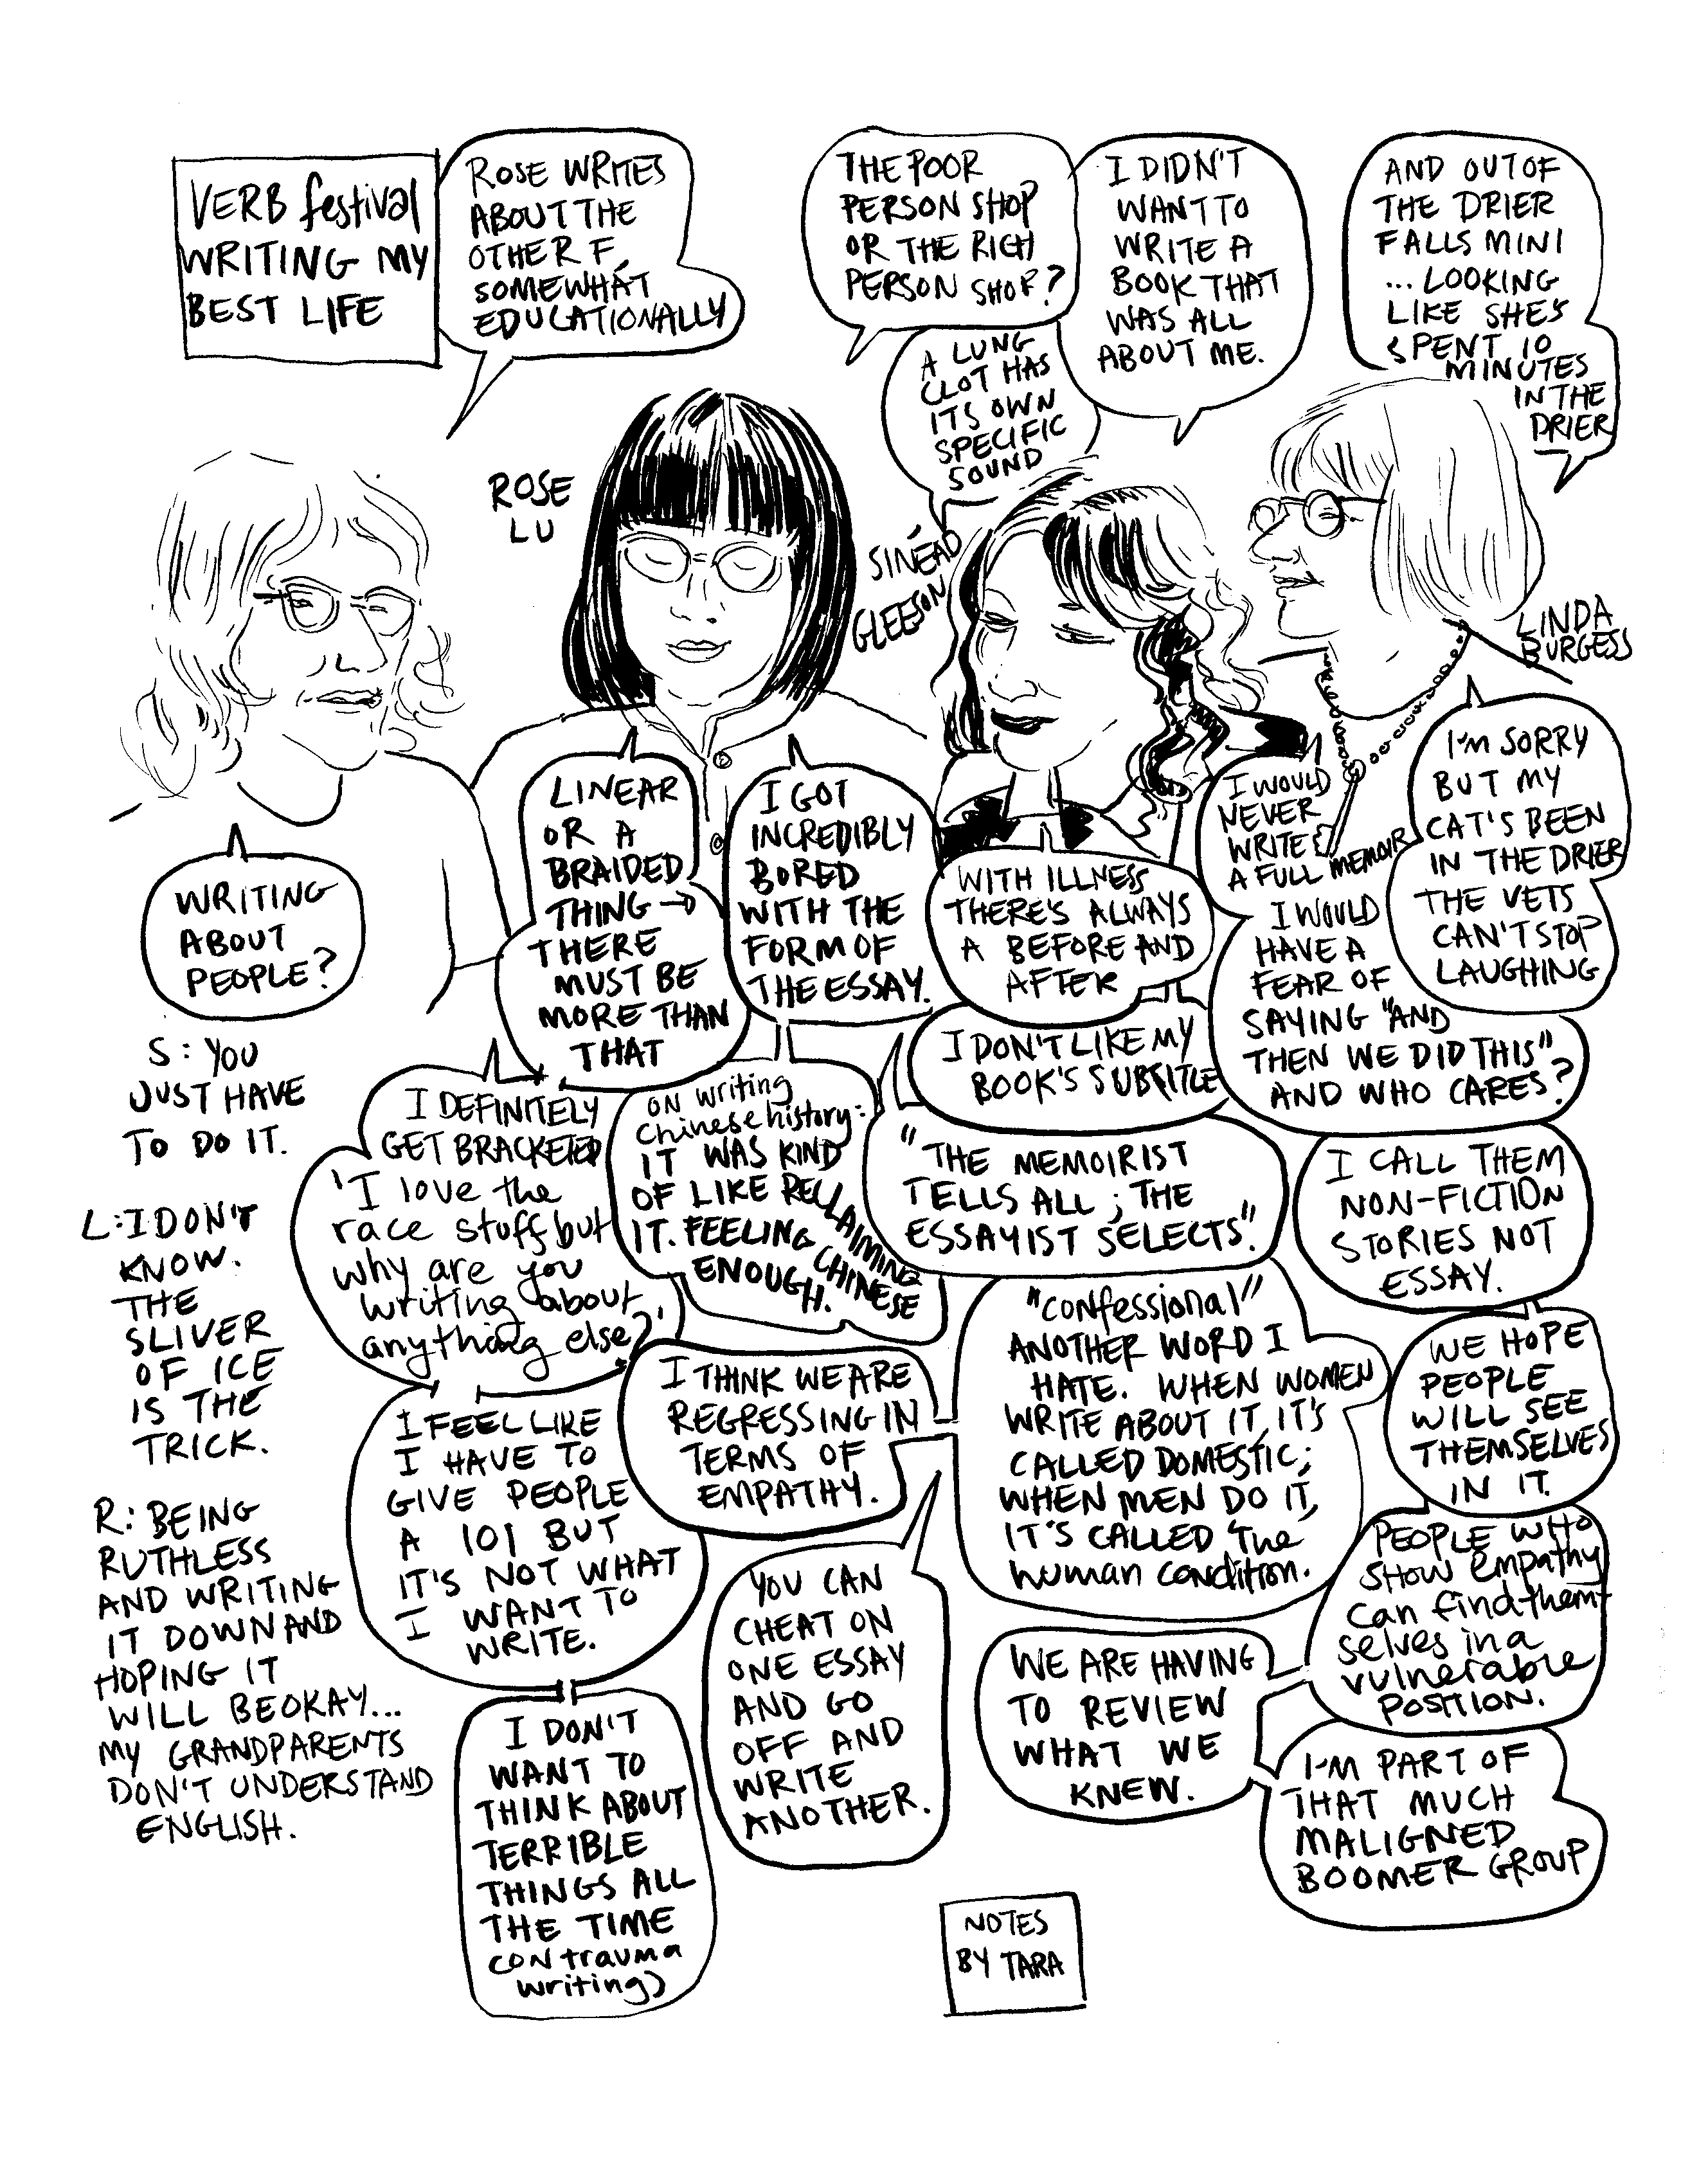 Comic-style drawing documenting an event with portraits of the speakers and speech bubbles with quotes.